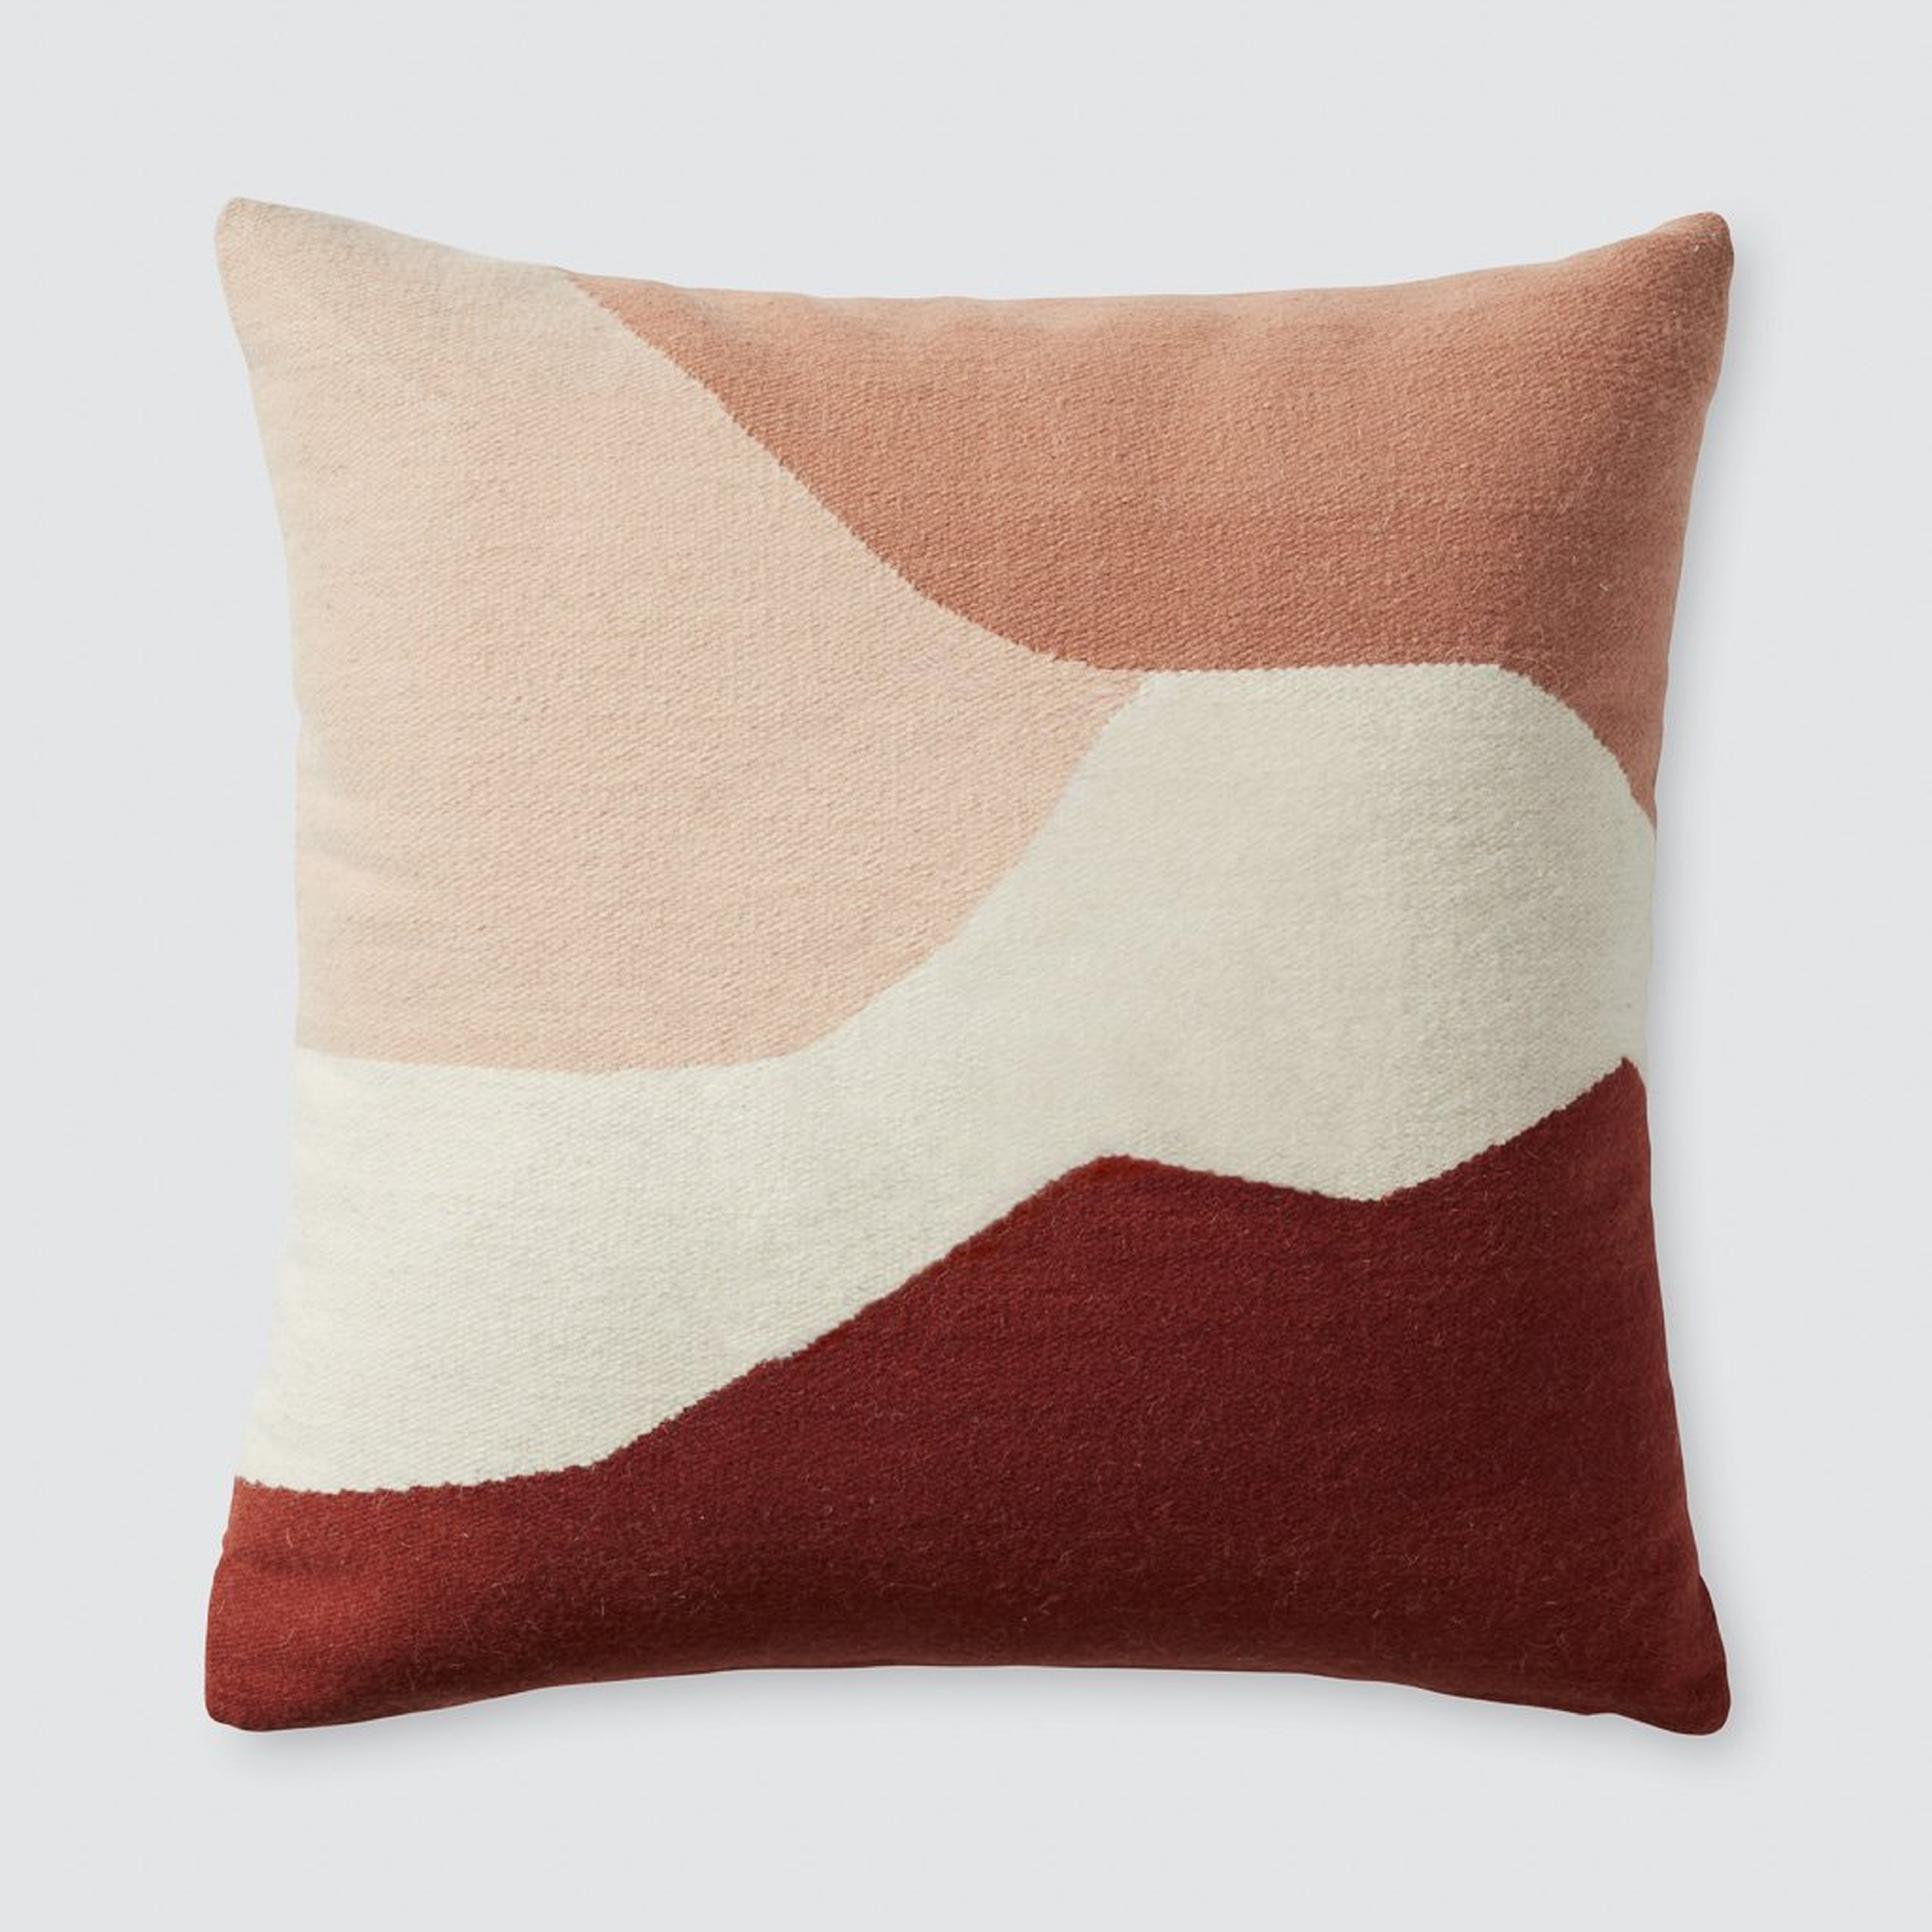 Las Artes Pillow - 22 in. x 22 in. By The Citizenry - The Citizenry